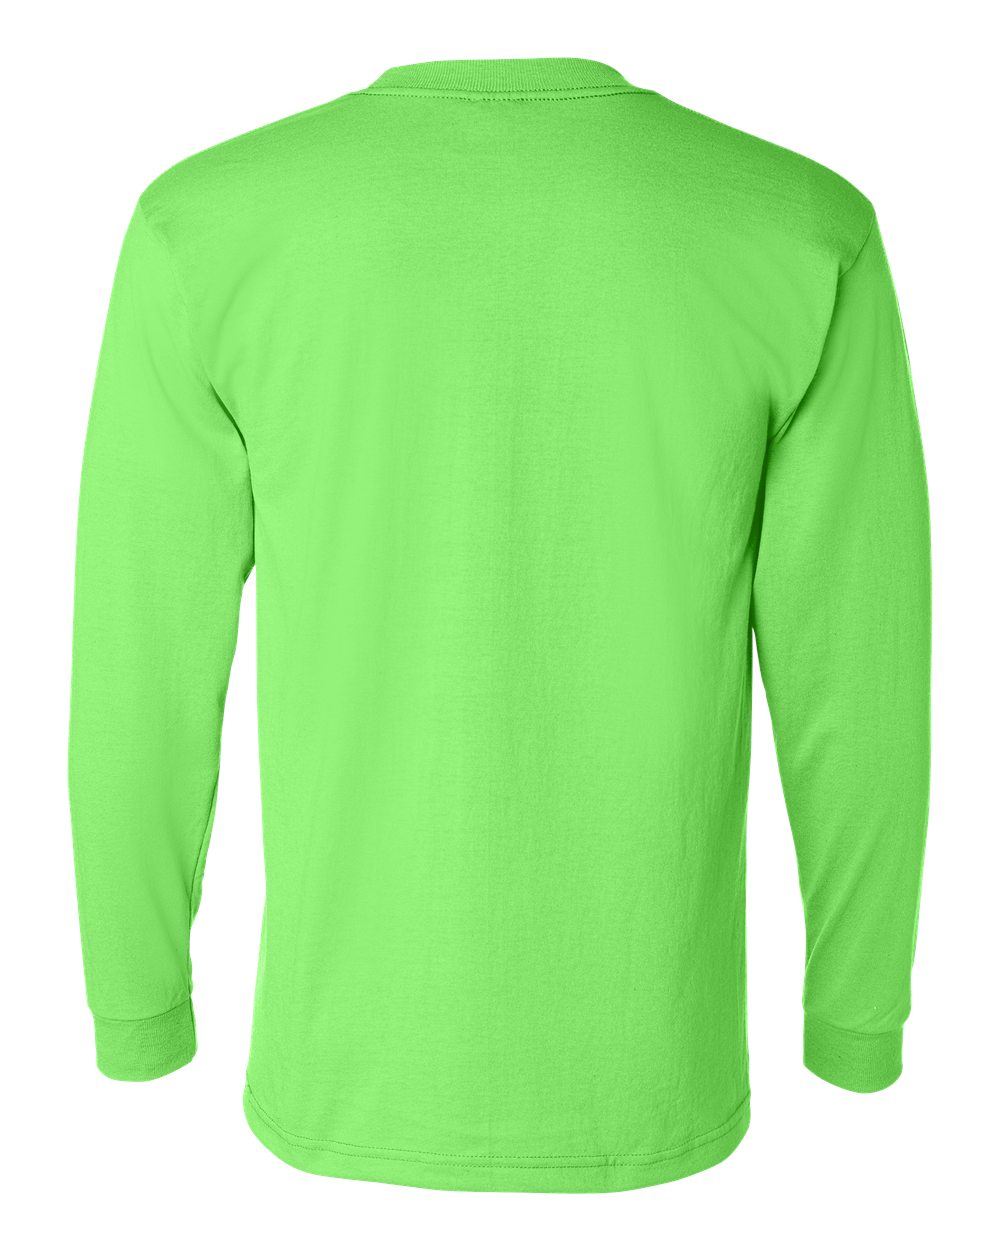 Safety Green Long Sleeve T-Shirt with Pocket - 50/50 Cotton/Poly  (Preshrunk) *Custom Printing Available*